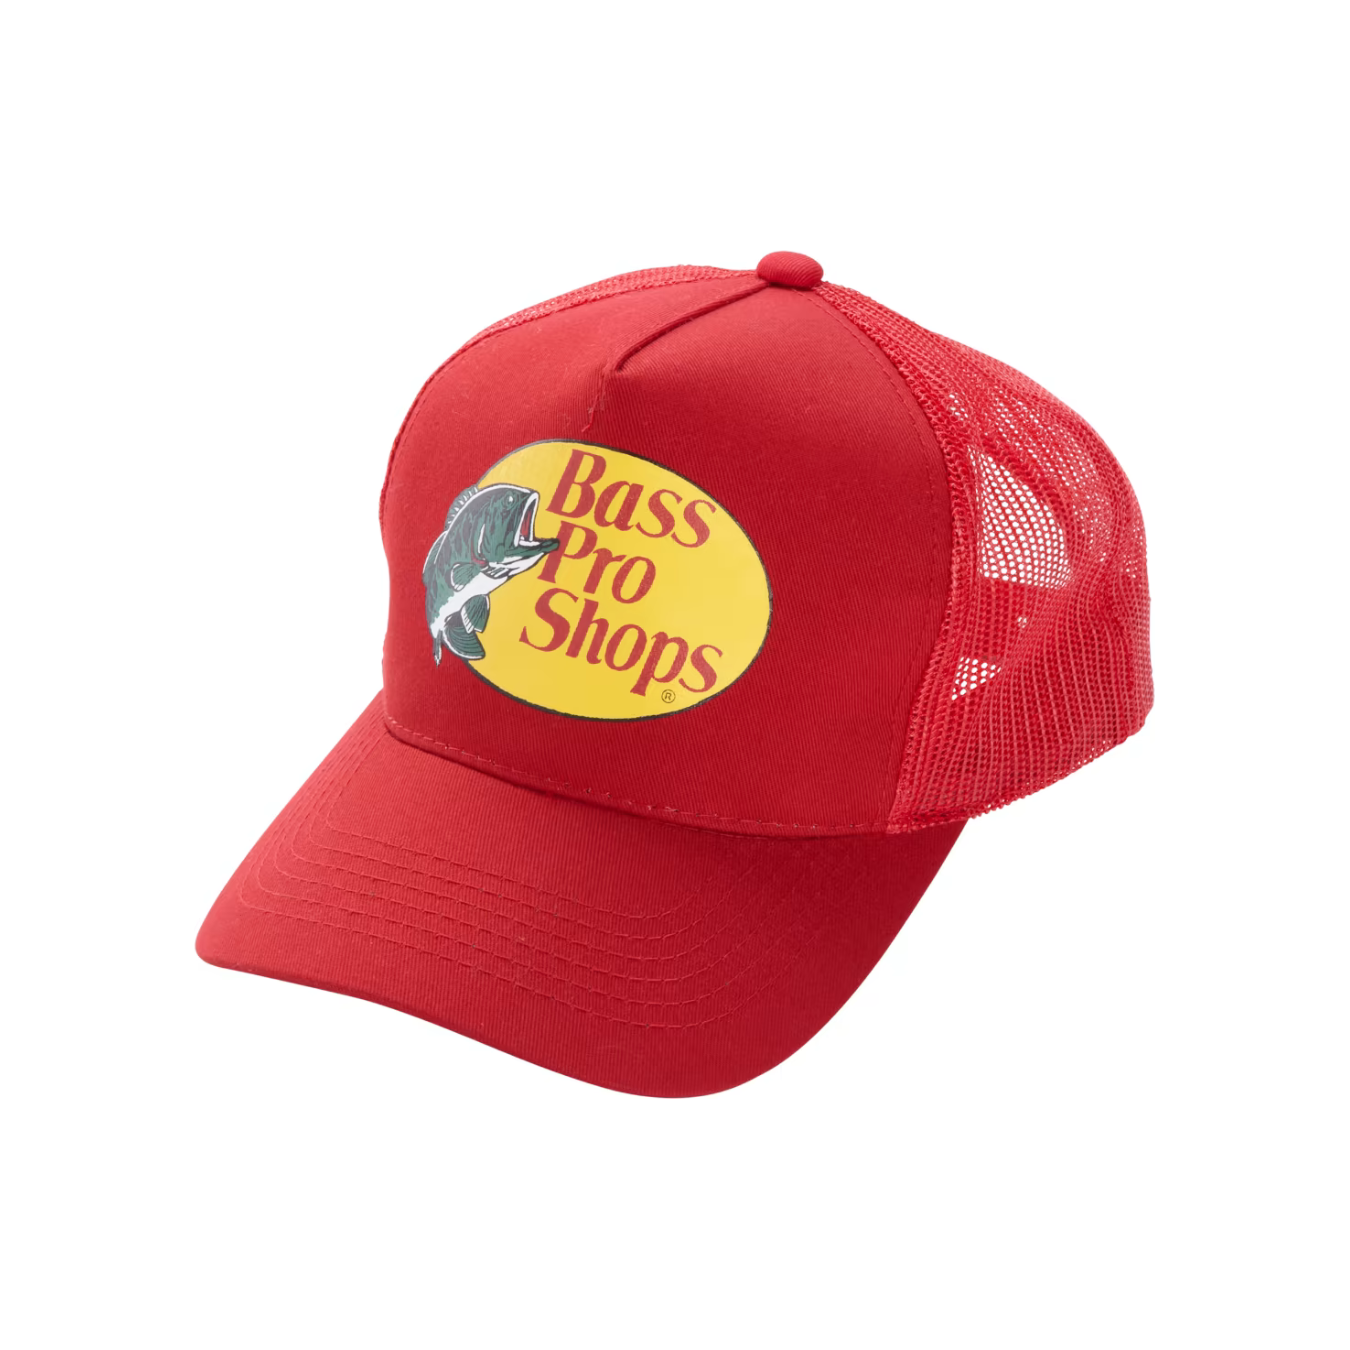 Bass Pro Hat - Red – All Day Sneakers